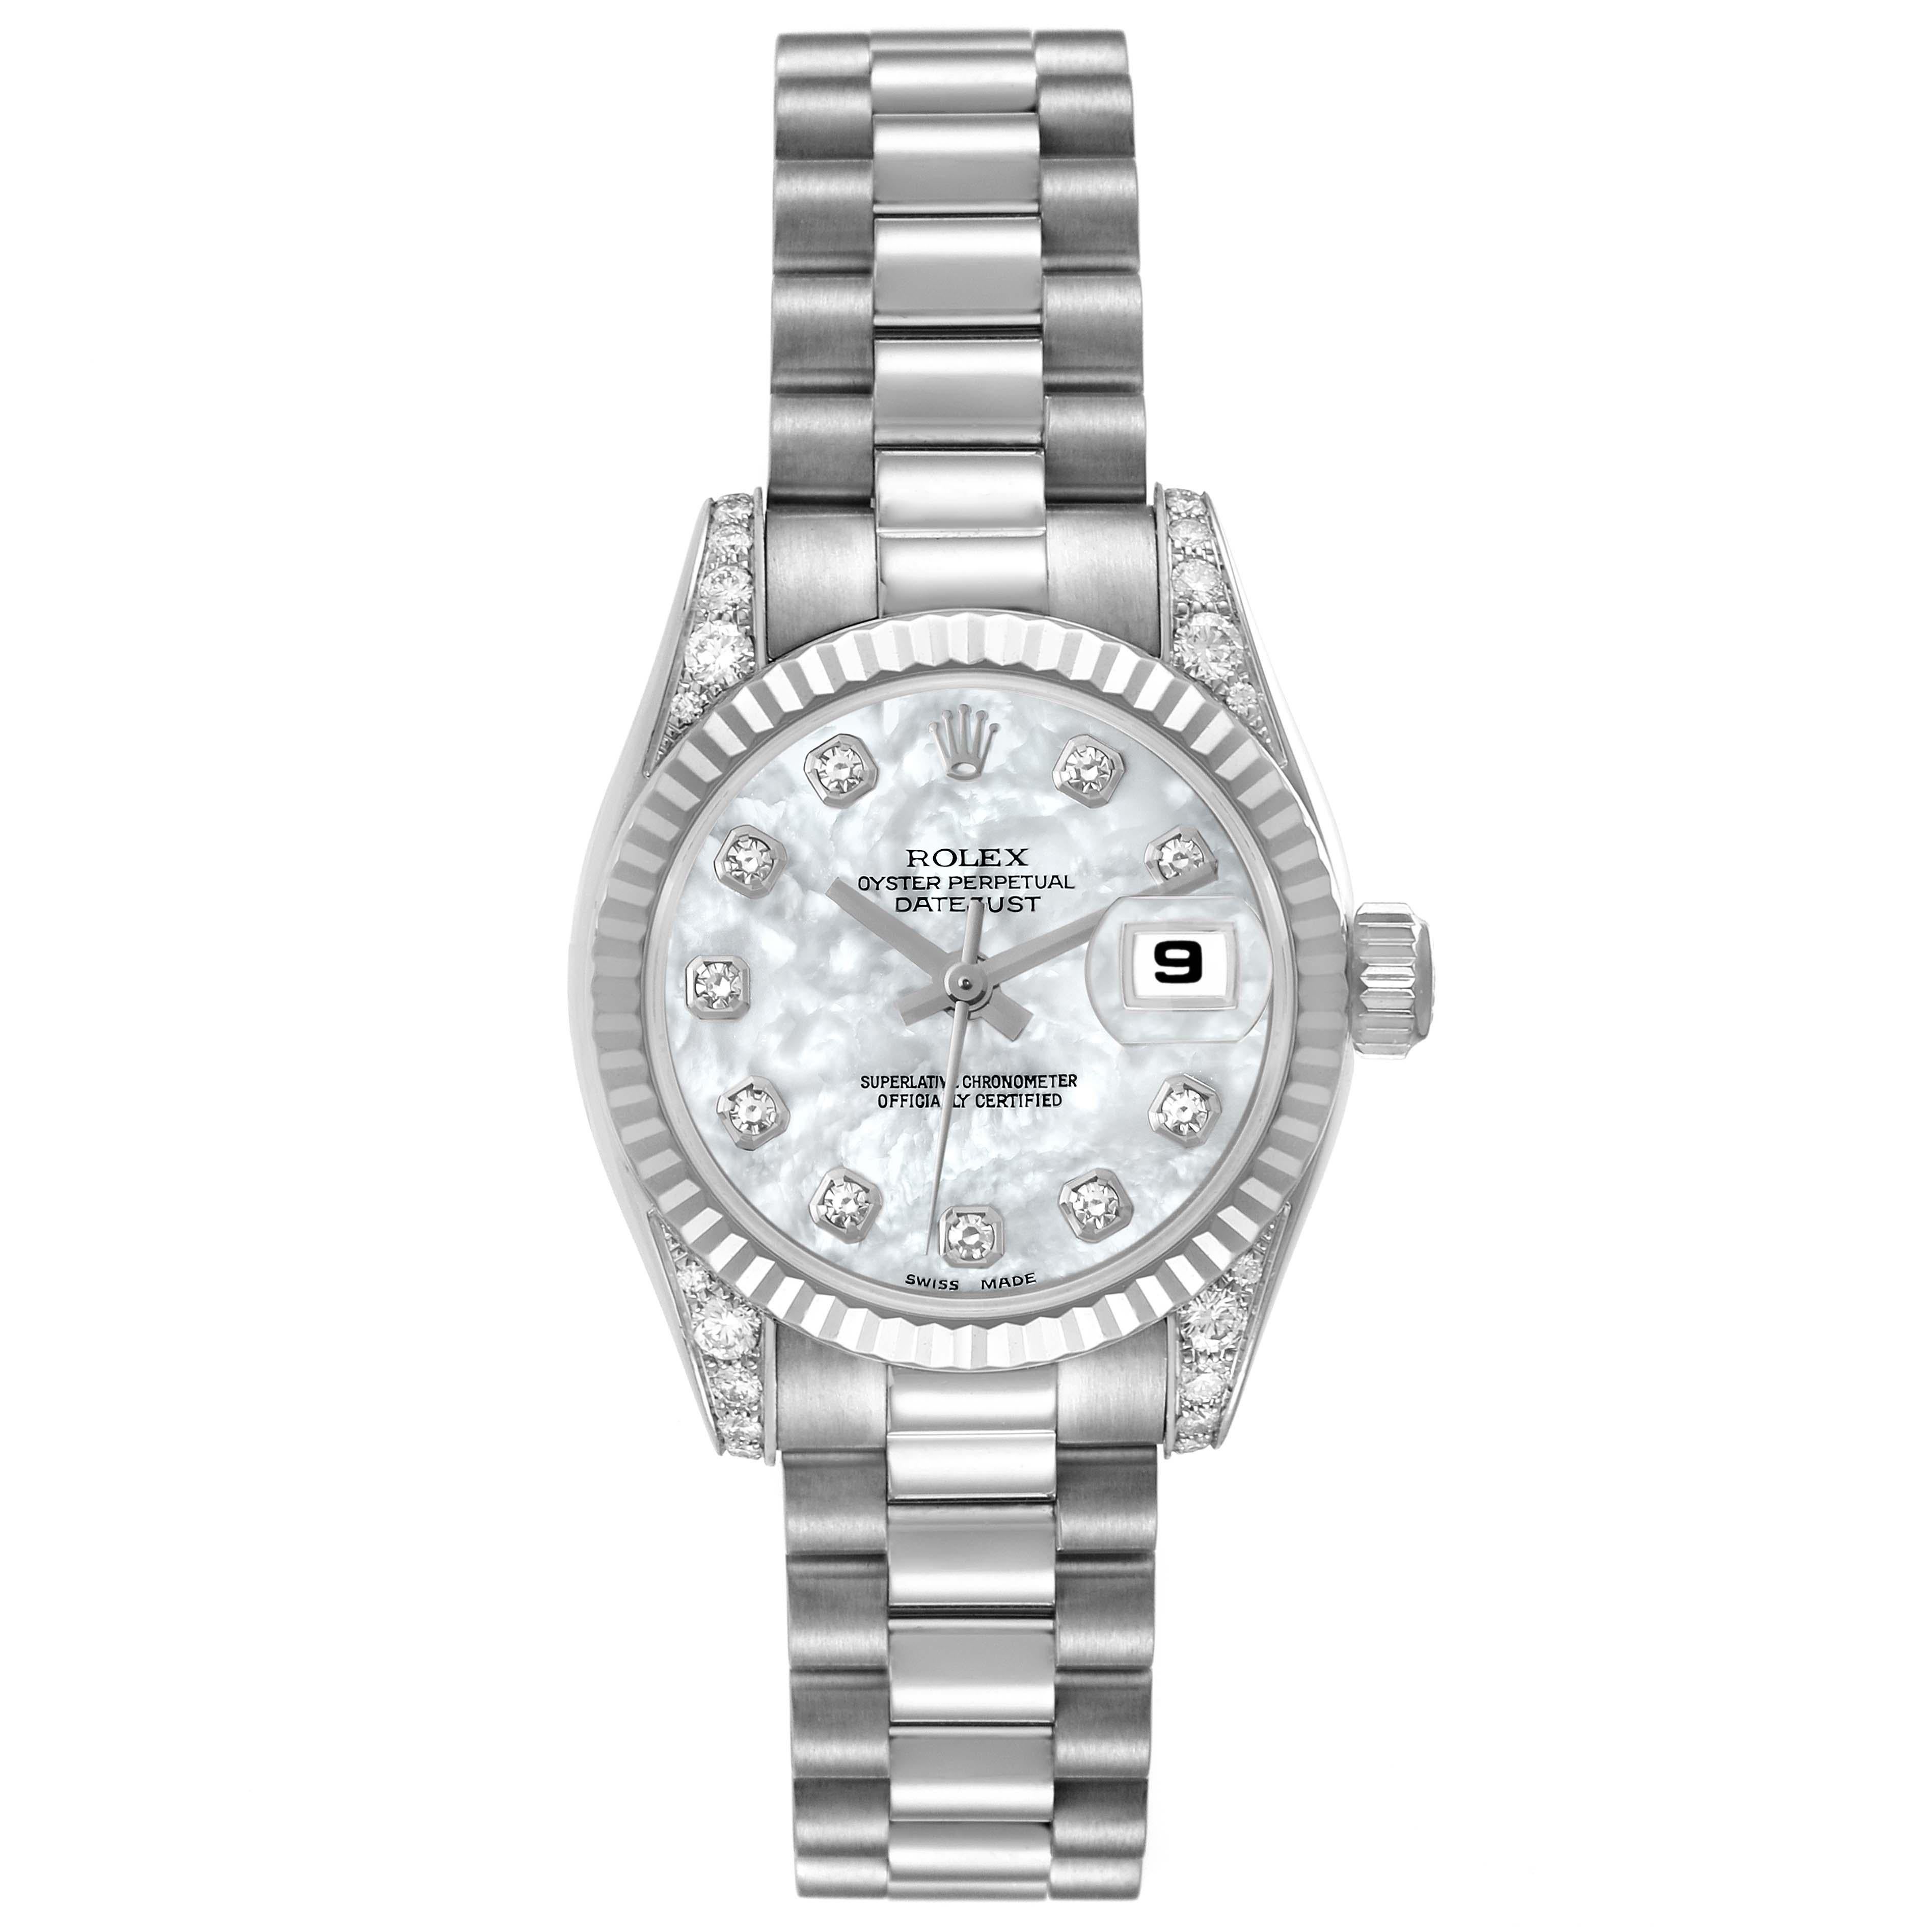 Rolex Datejust President White Gold MOP Dial Diamond Ladies Watch 179159. Officially certified chronometer automatic self-winding movement with quickset date function. 18k white gold oyster case 26.0 mm in diameter. Lugs are set with original Rolex